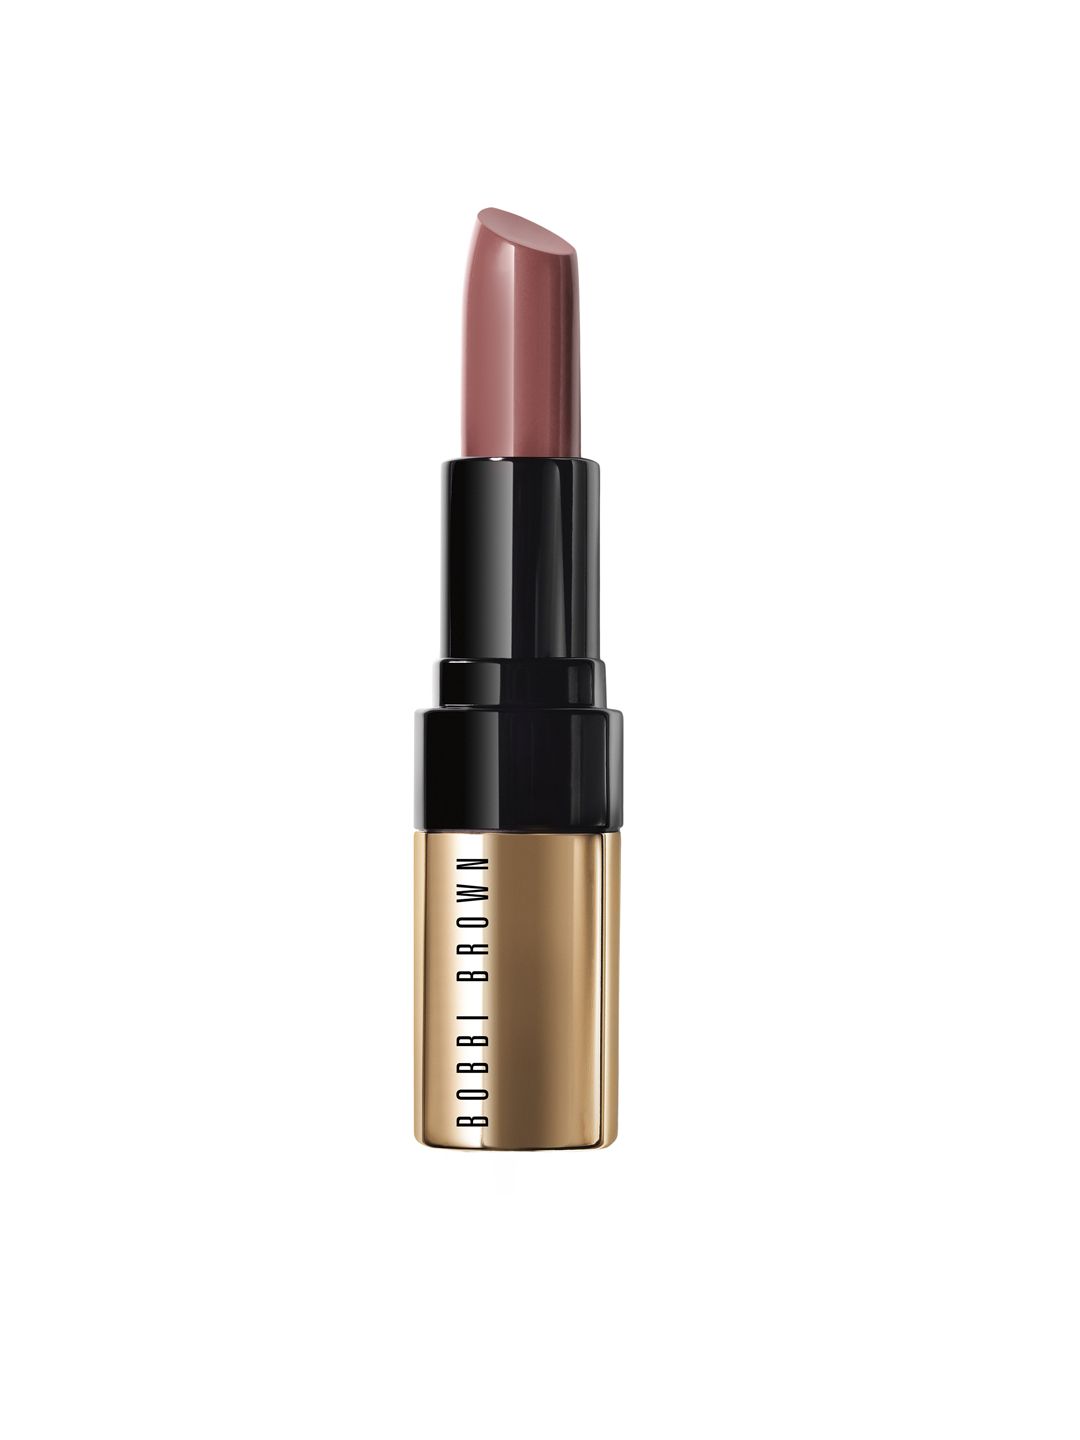 Bobbi Brown Luxe Lip Color - Downtown Plum 17 3.8gm Price in India